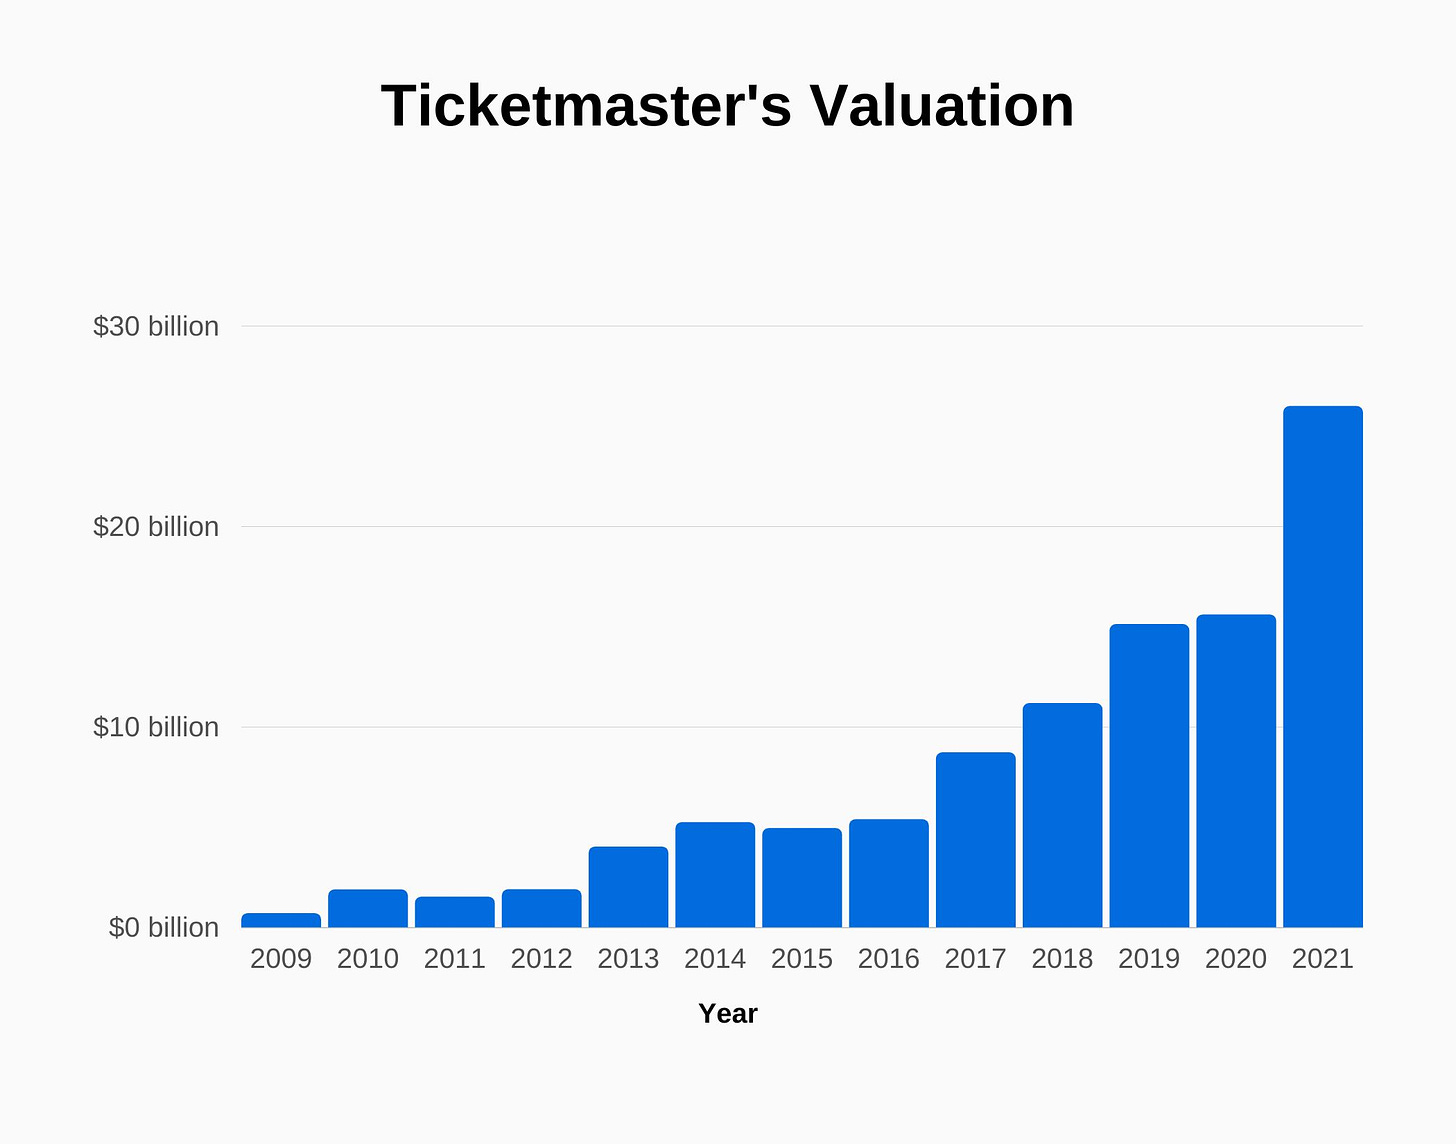 Graph about Ticketmaster's valuation